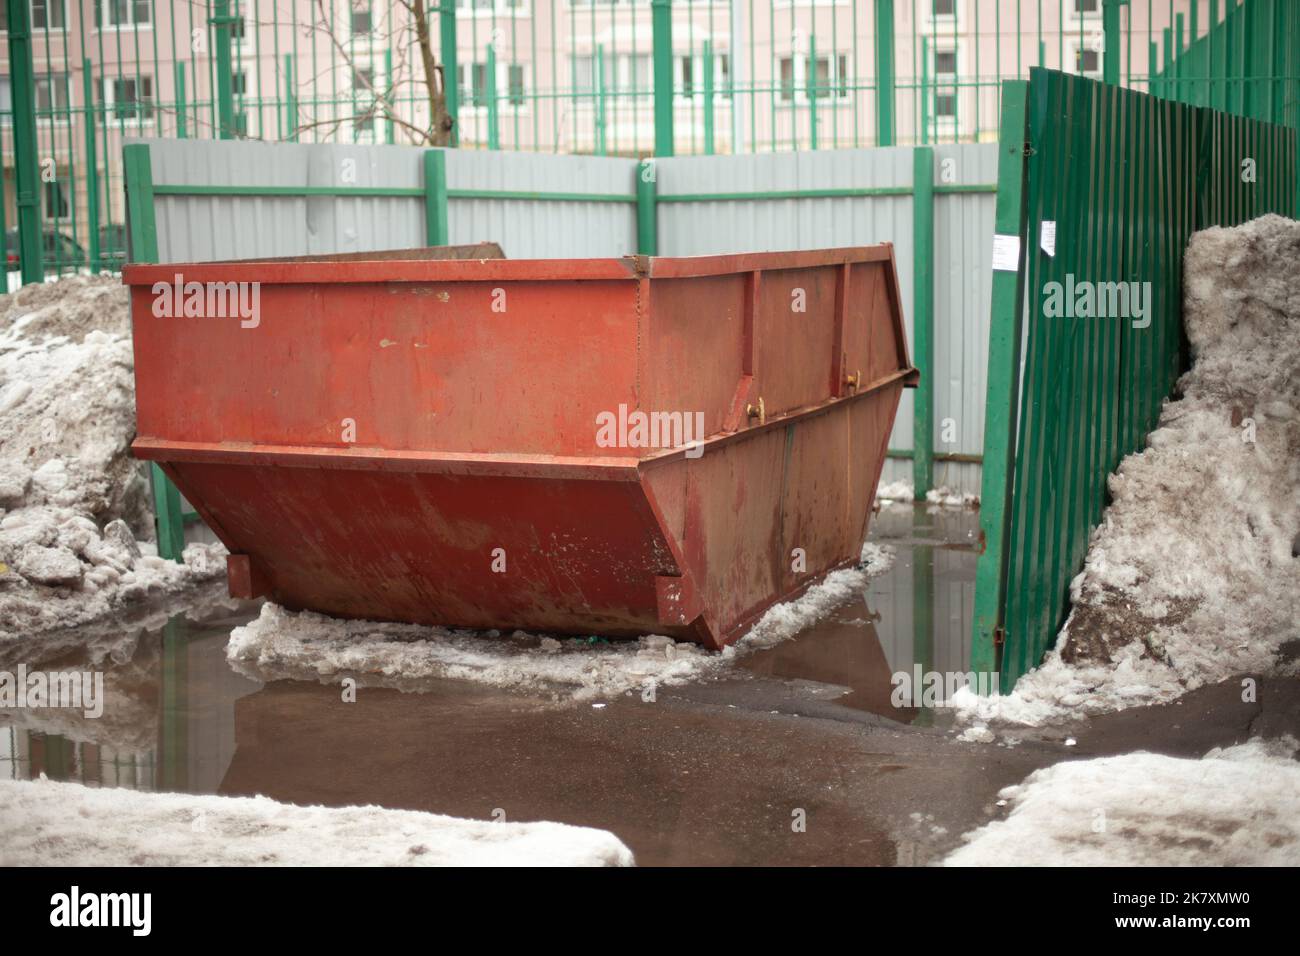 https://c8.alamy.com/comp/2K7XMW0/garbage-container-steel-waste-tank-in-city-large-garbage-can-in-yard-details-of-urban-infrastructure-2K7XMW0.jpg